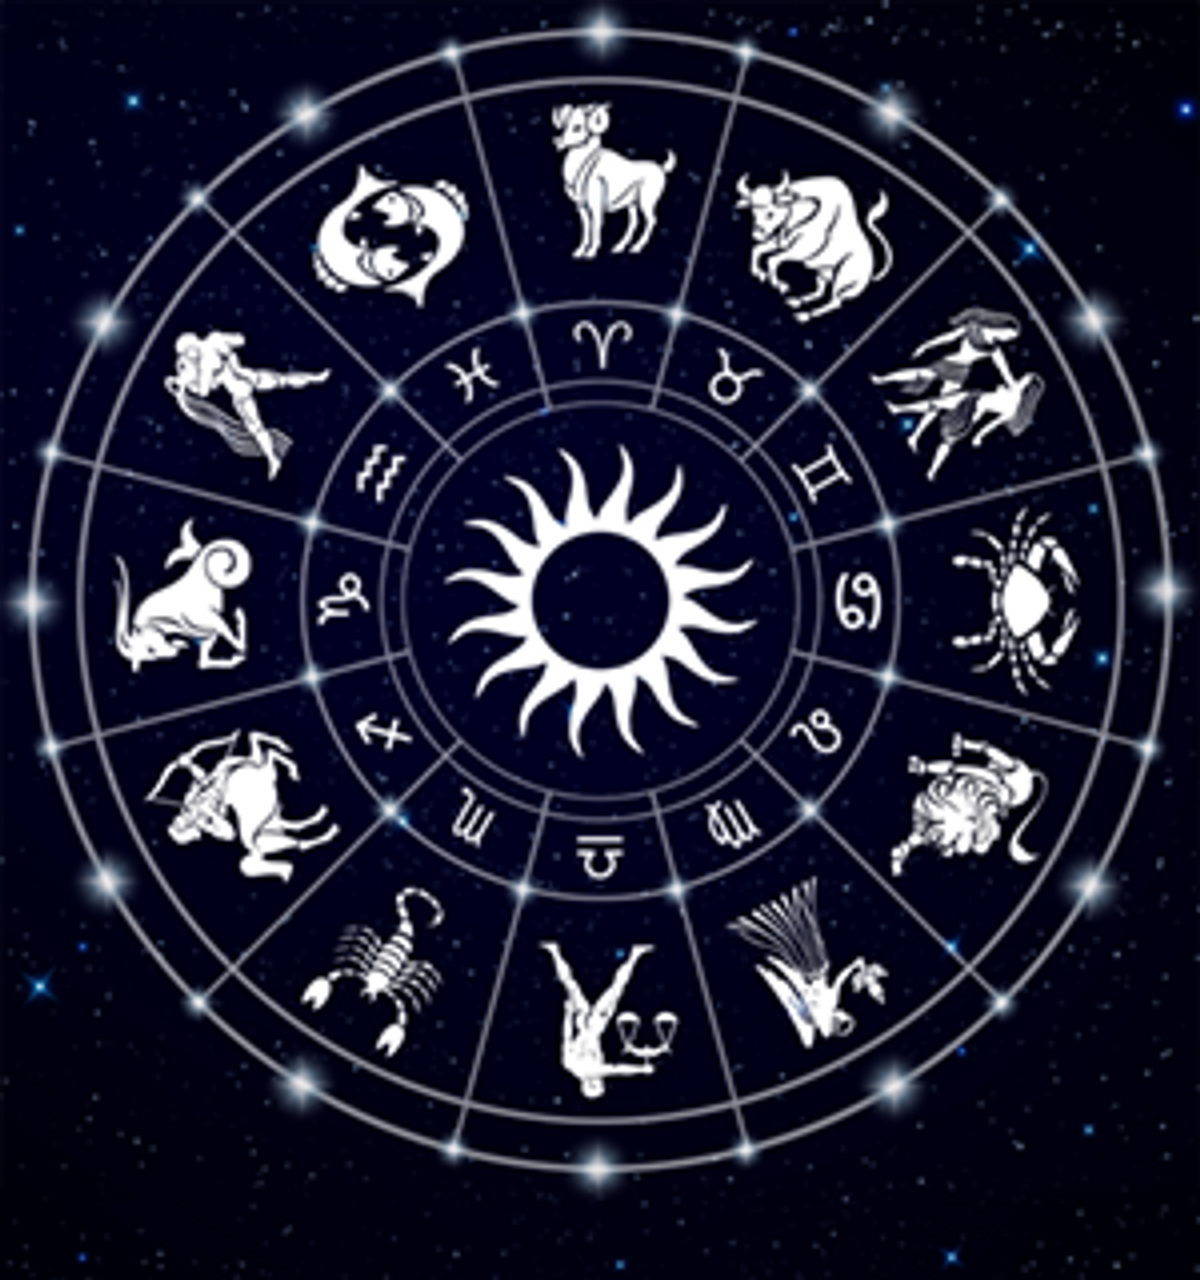 Why Your Astrological Sign May Not Match Your Personality